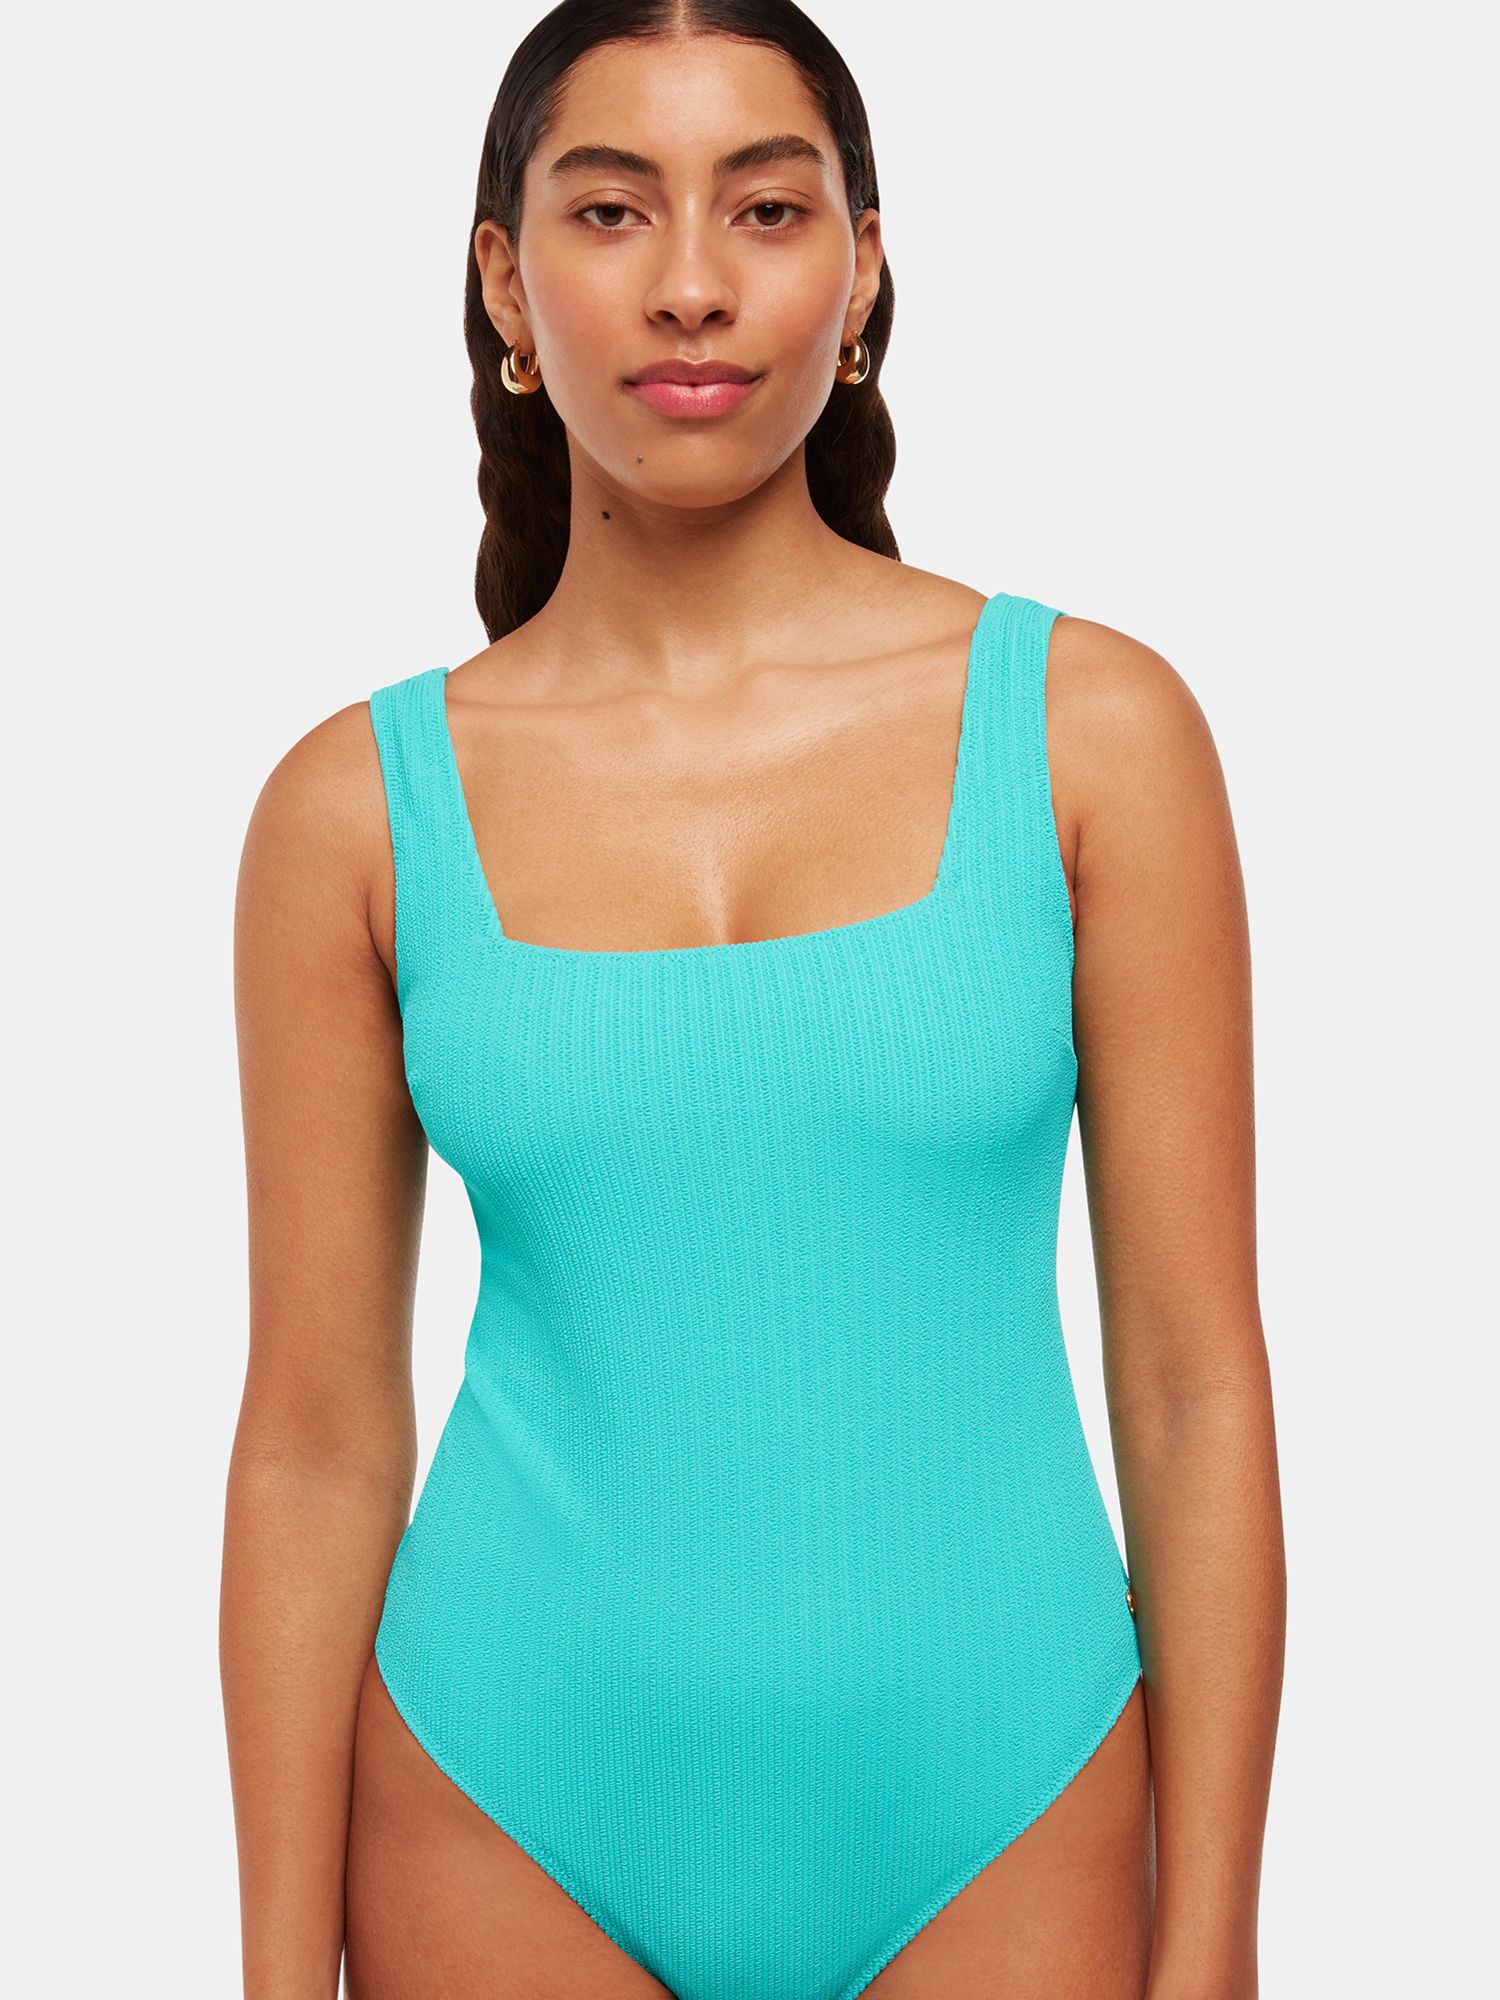 Whistles Textured Square Neck Swimsuit, Turquoise, 6